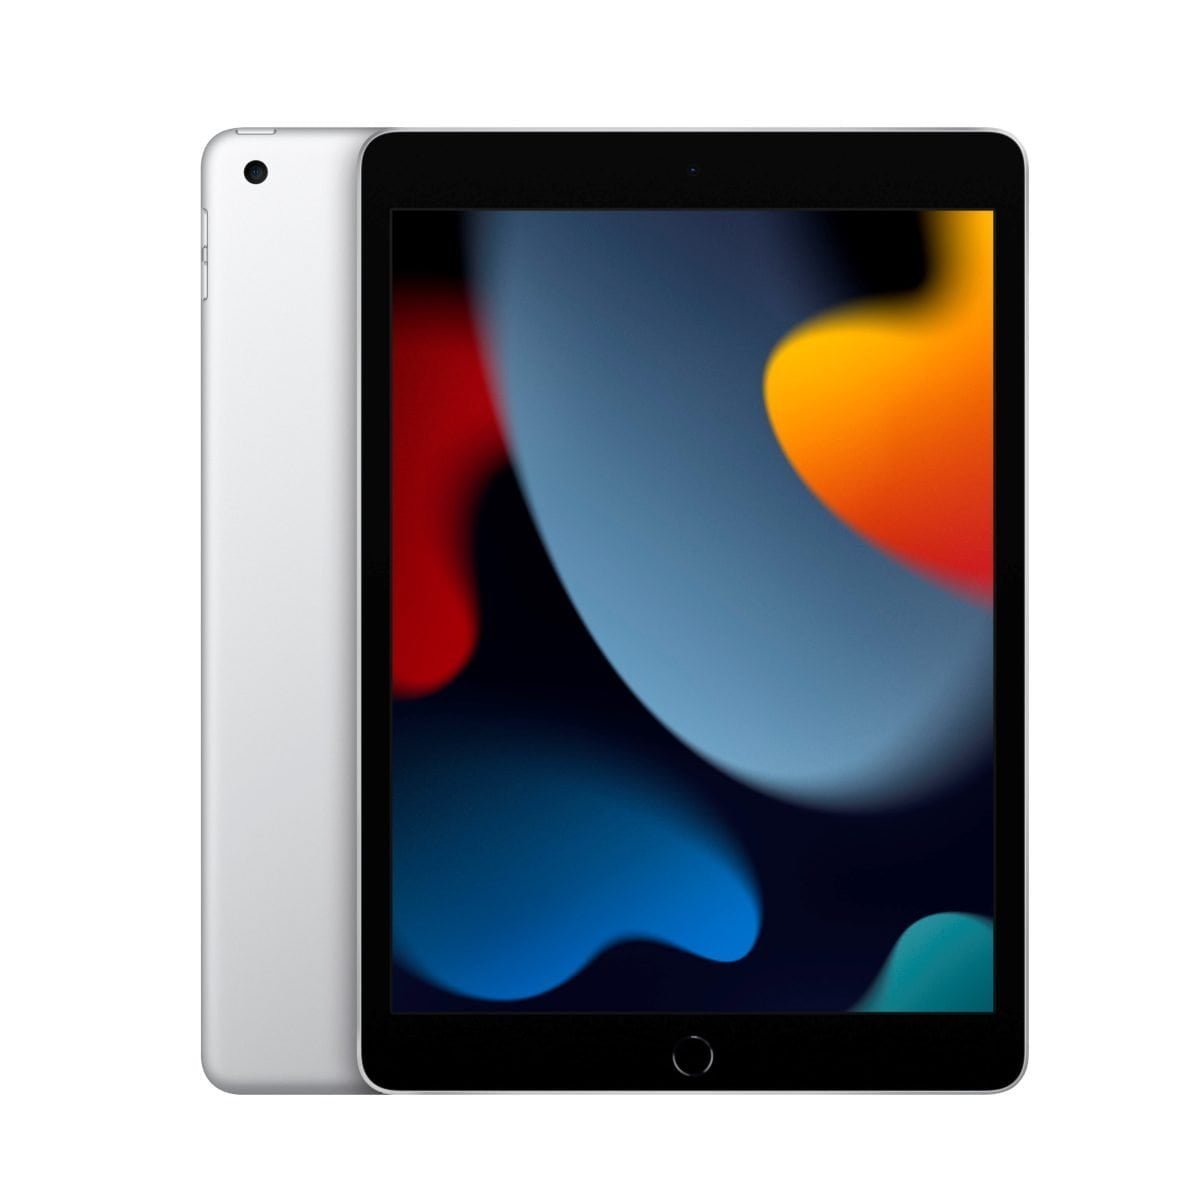 4901868 Sd Scaled Apple &Amp;Lt;H1&Amp;Gt;Apple 10.2-Inch Ipad (9Th Generation) With Wi-Fi - 64Gb - Silver&Amp;Lt;/H1&Amp;Gt; Https://Www.youtube.com/Watch?V=Loaocx5Xc9S Powerful. Easy To Use. Versatile. The New Ipad Has A Beautiful 10.2-Inch Retina Display, Powerful A13 Bionic Chip, An Ultra Wide Front Camera With Center Stage, And Works With Apple Pencil And The Smart Keyboard.¹ Ipad Lets You Do More, More Easily. All For An Incredible Value. Ipad Apple 10.2-Inch Ipad (9Th Generation) With Wi-Fi - 64Gb - Silver Mk2L3